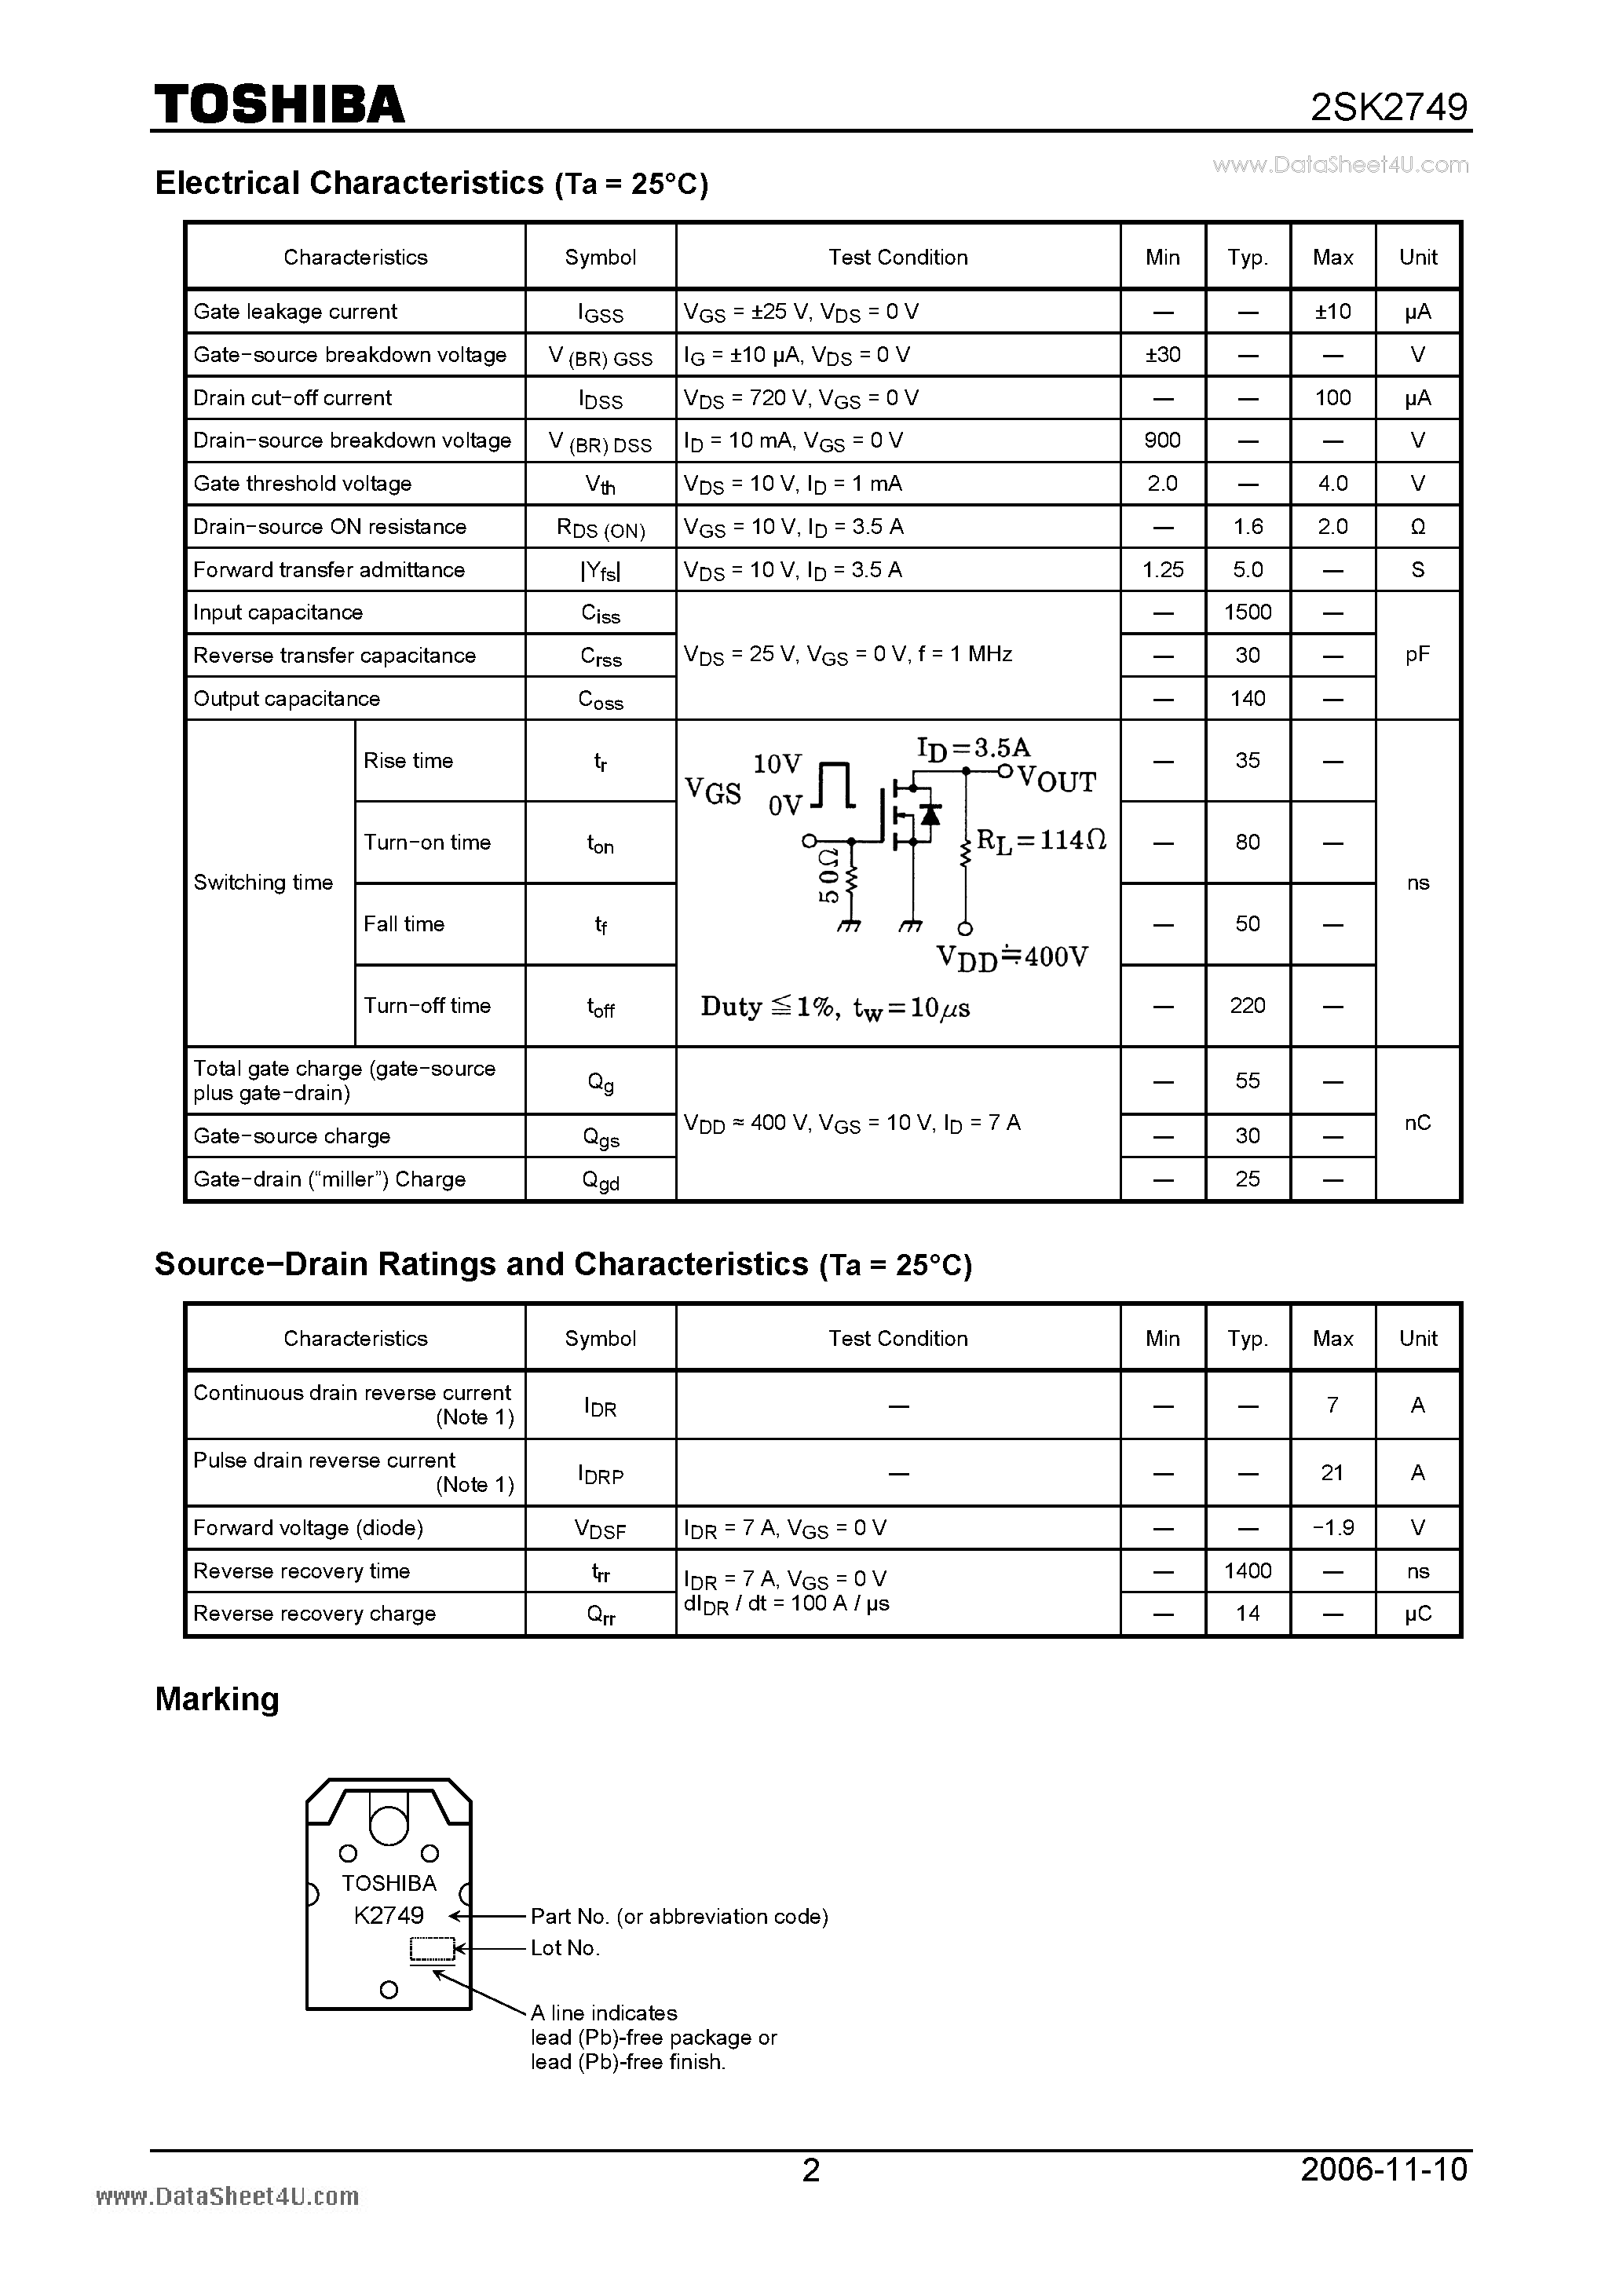 Datasheet K2749 - Search -----> 2SK2749 page 2